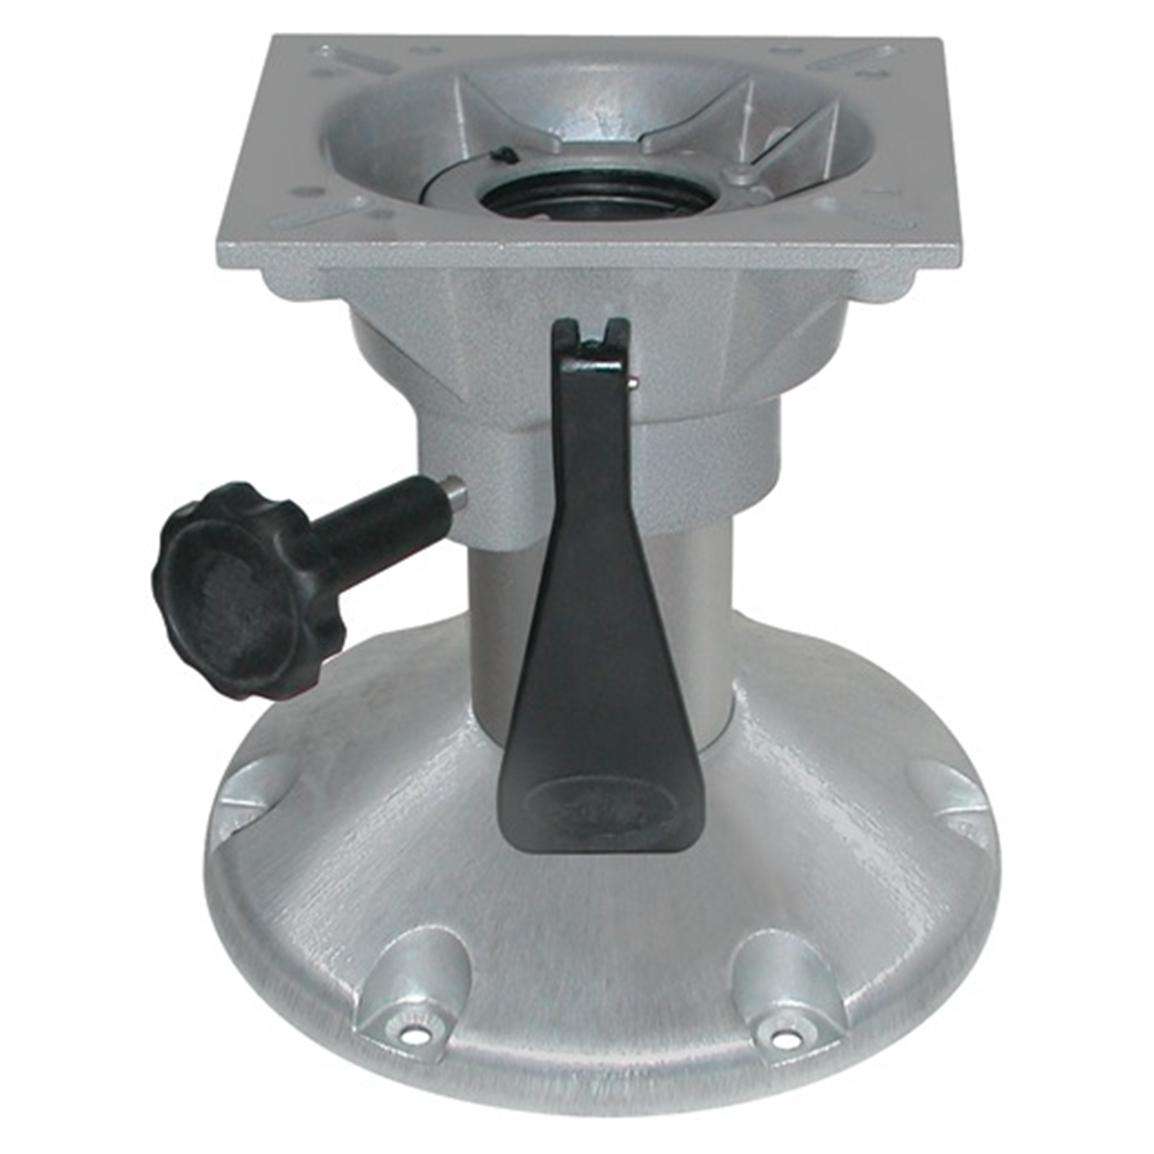 Wise® 2 3/8"  Fixed Seat Pedestal